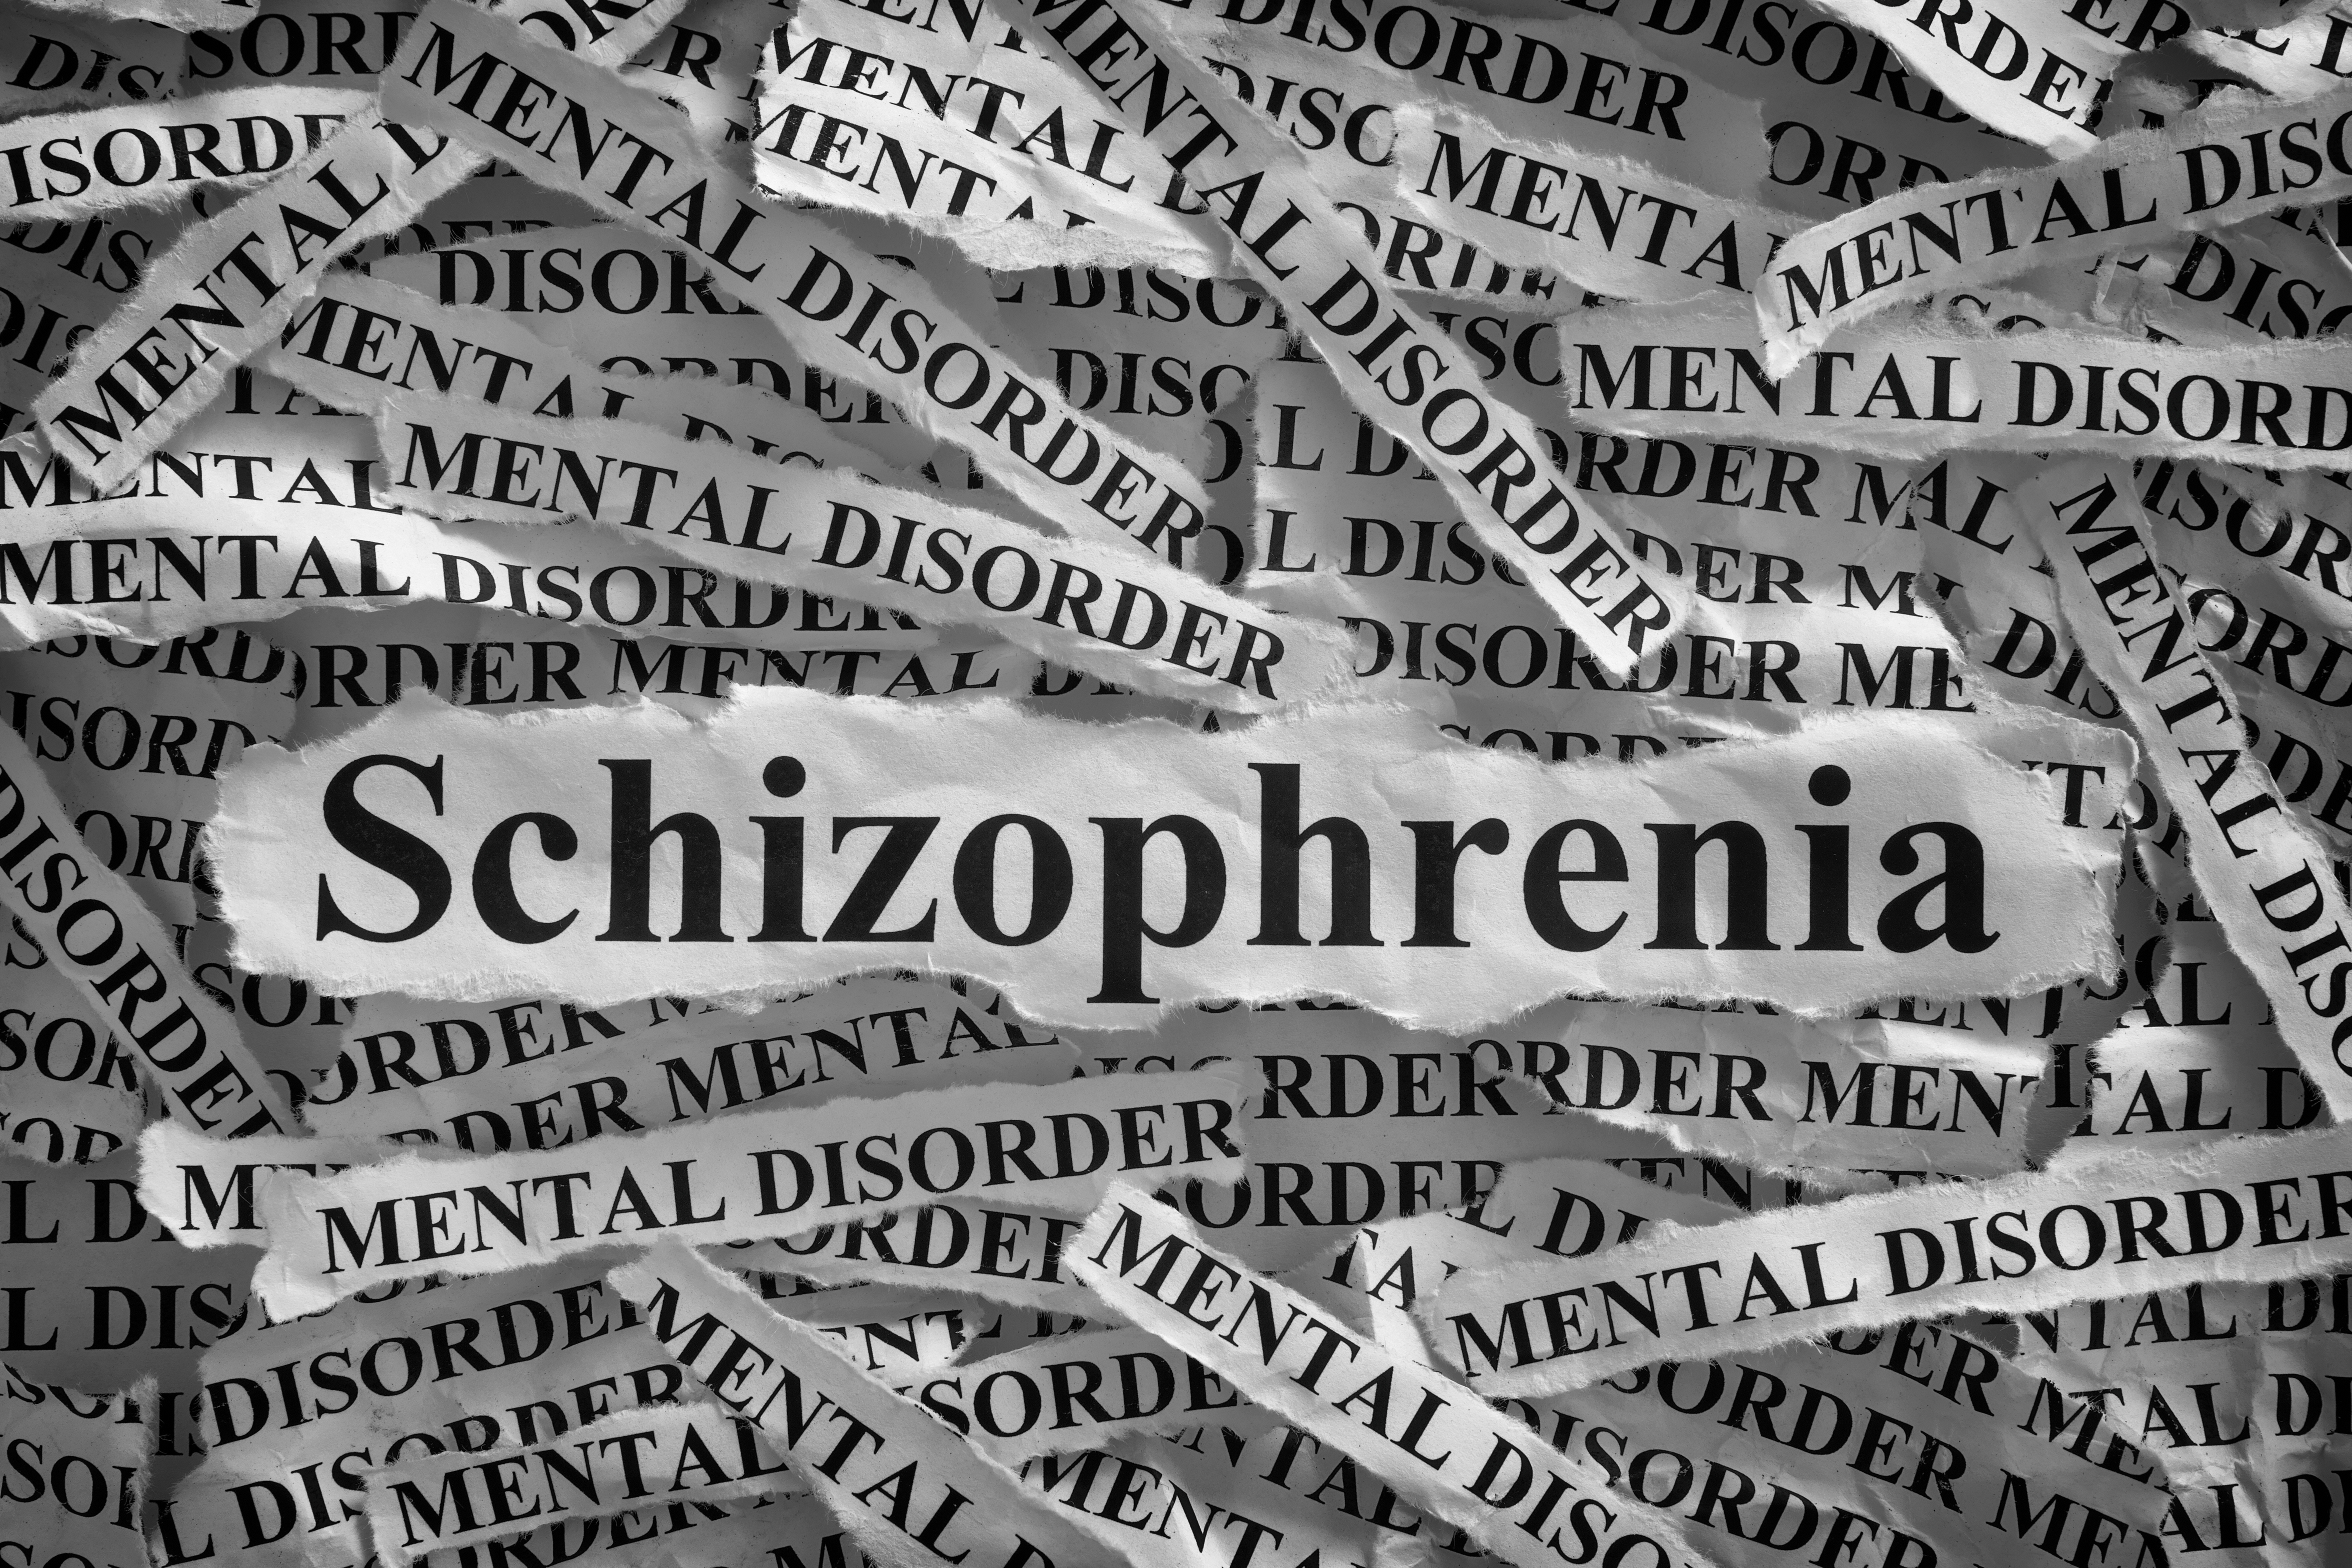 5 Things You Should Know About Schizophrenia